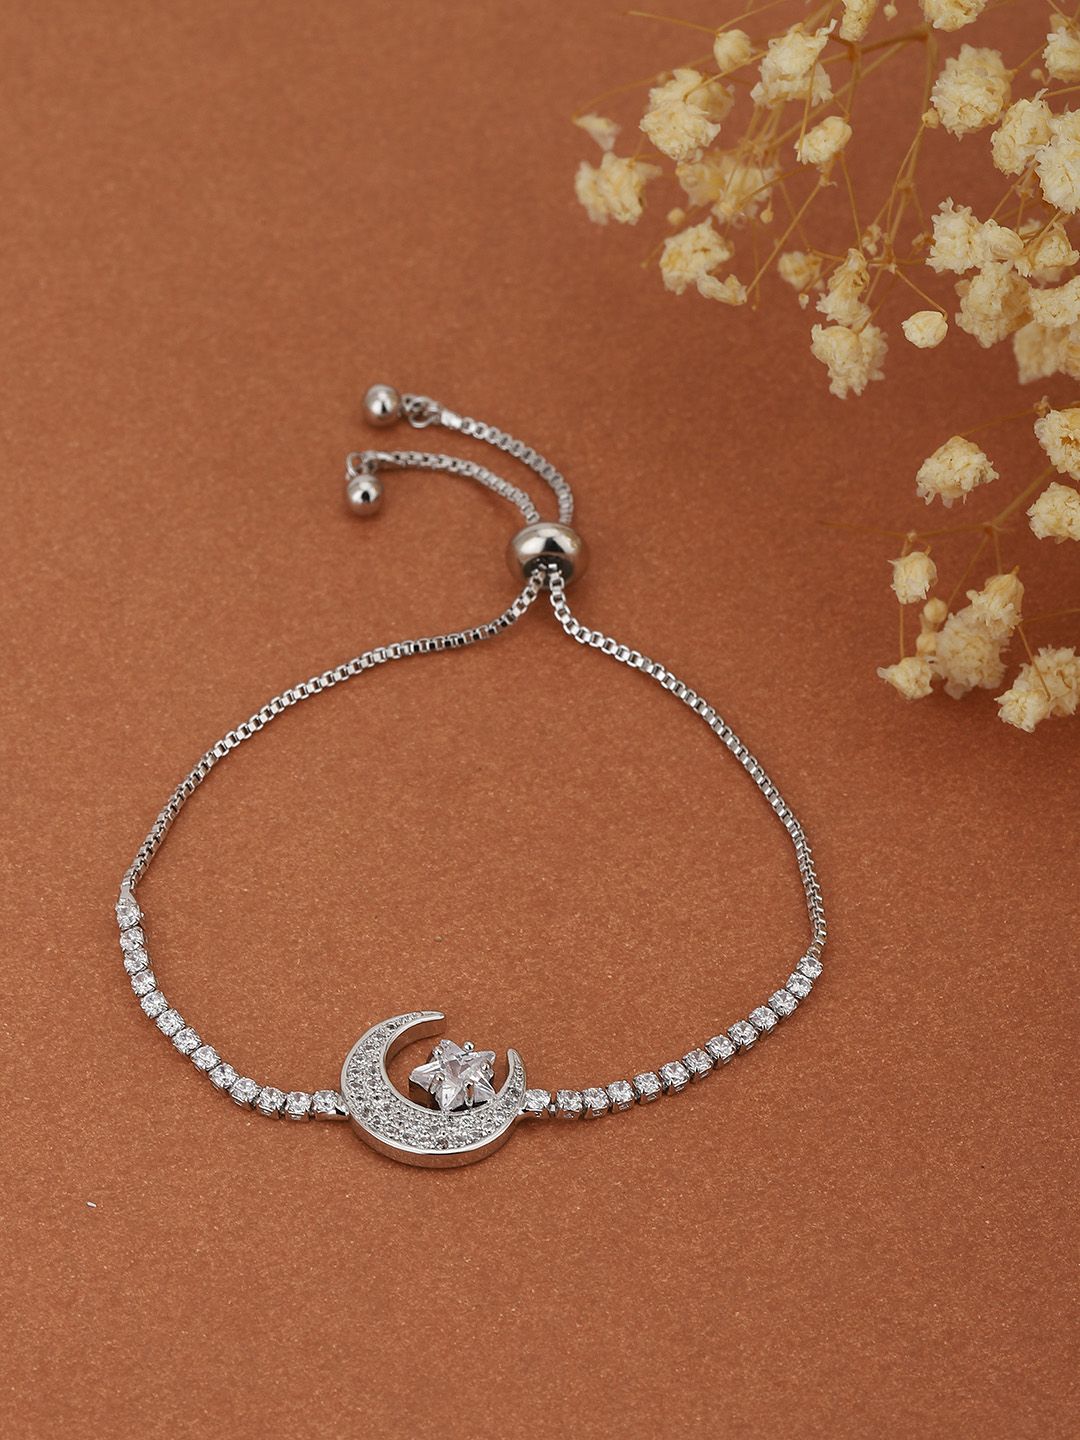 Carlton London Silver-Toned CZ-Studded Rhodium-Plated Handcrafted Link Bracelet Price in India